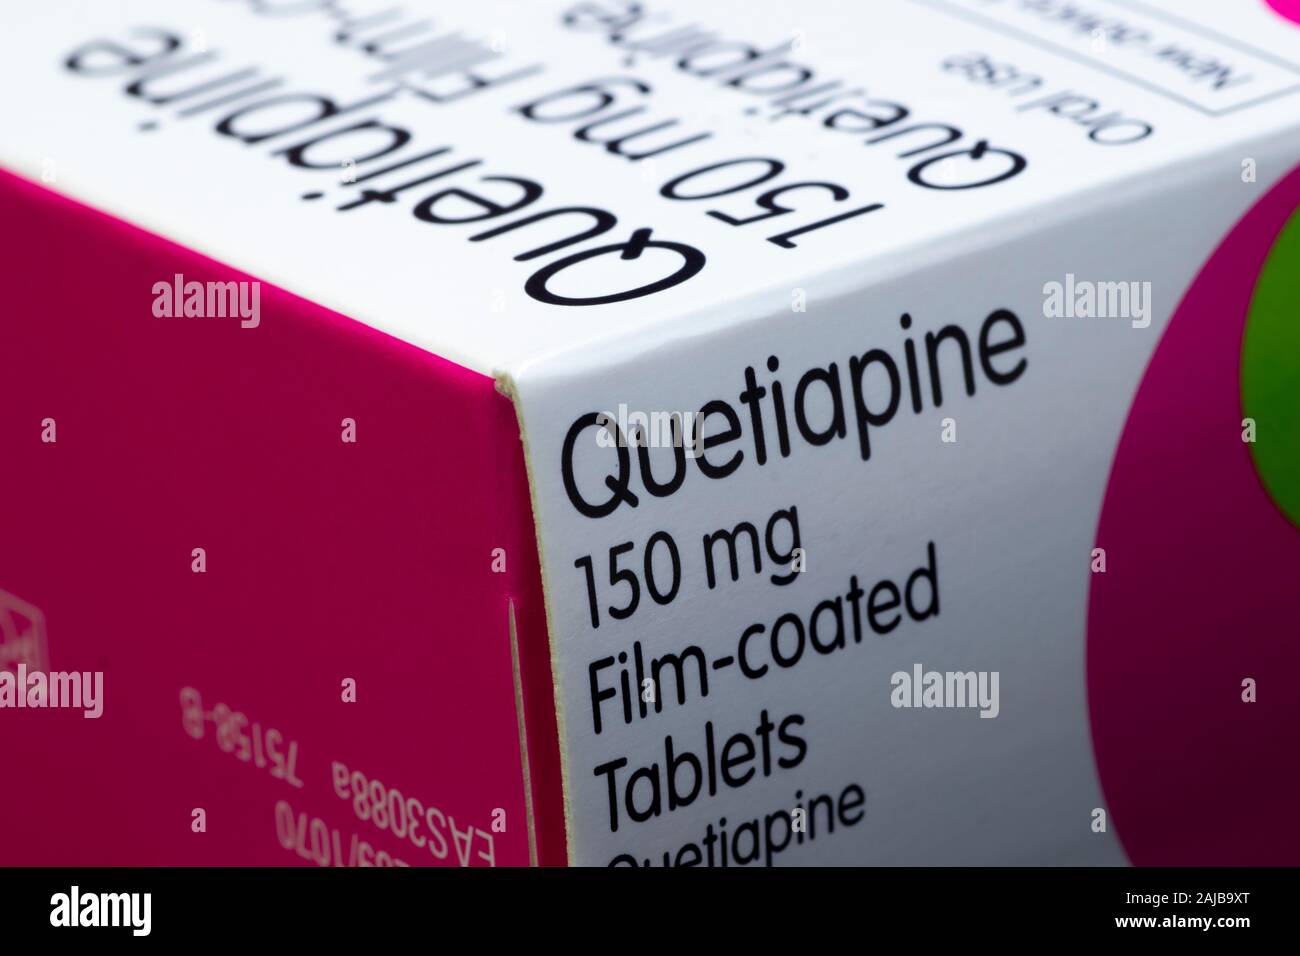 Box of Quetiapine tablets, an atypical antipsychotic drug used for the  treatment of schizophrenia, bipolar disorder, and major depressive disorder  Stock Photo - Alamy